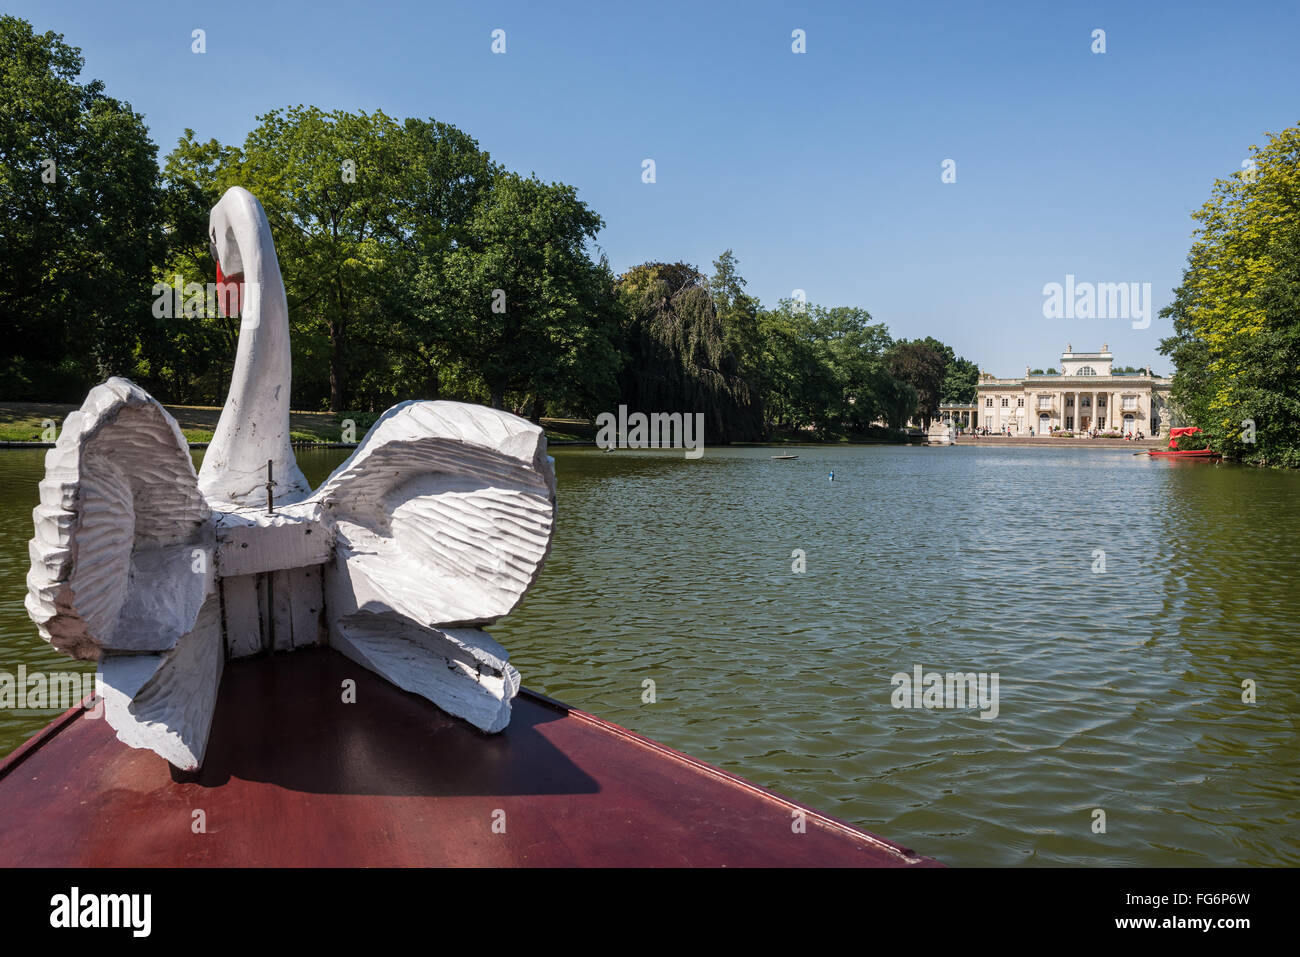 swan figure on the gondola boat and  Palace on the Water in Lazienki Krolewskie (Royal Baths Park) in Warsaw, Poland Stock Photo